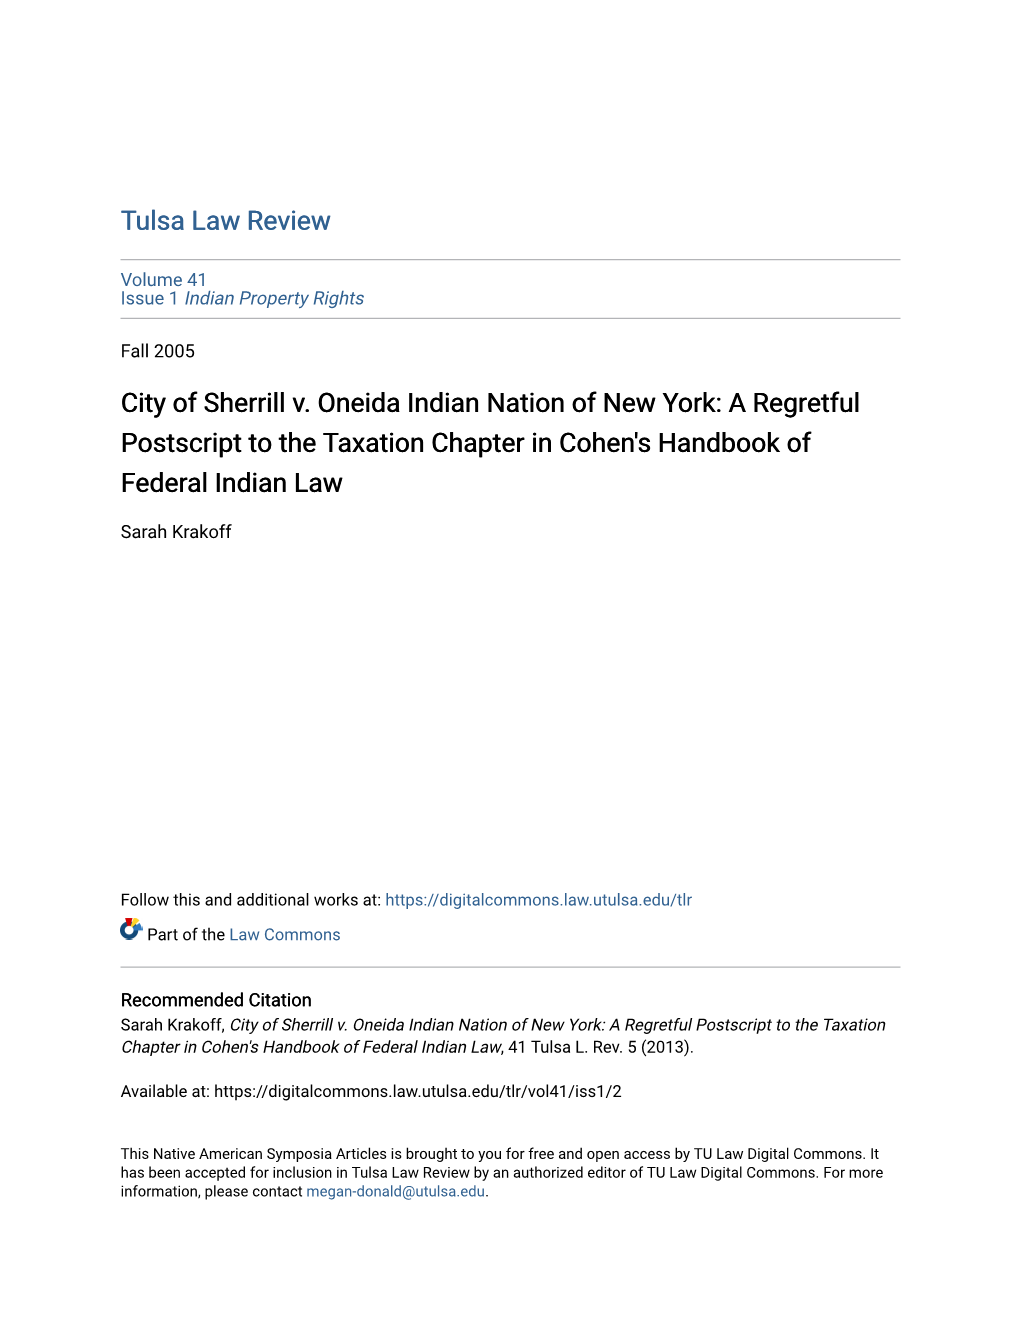 City of Sherrill V. Oneida Indian Nation of New York: a Regretful Postscript to the Taxation Chapter in Cohen's Handbook of Federal Indian Law